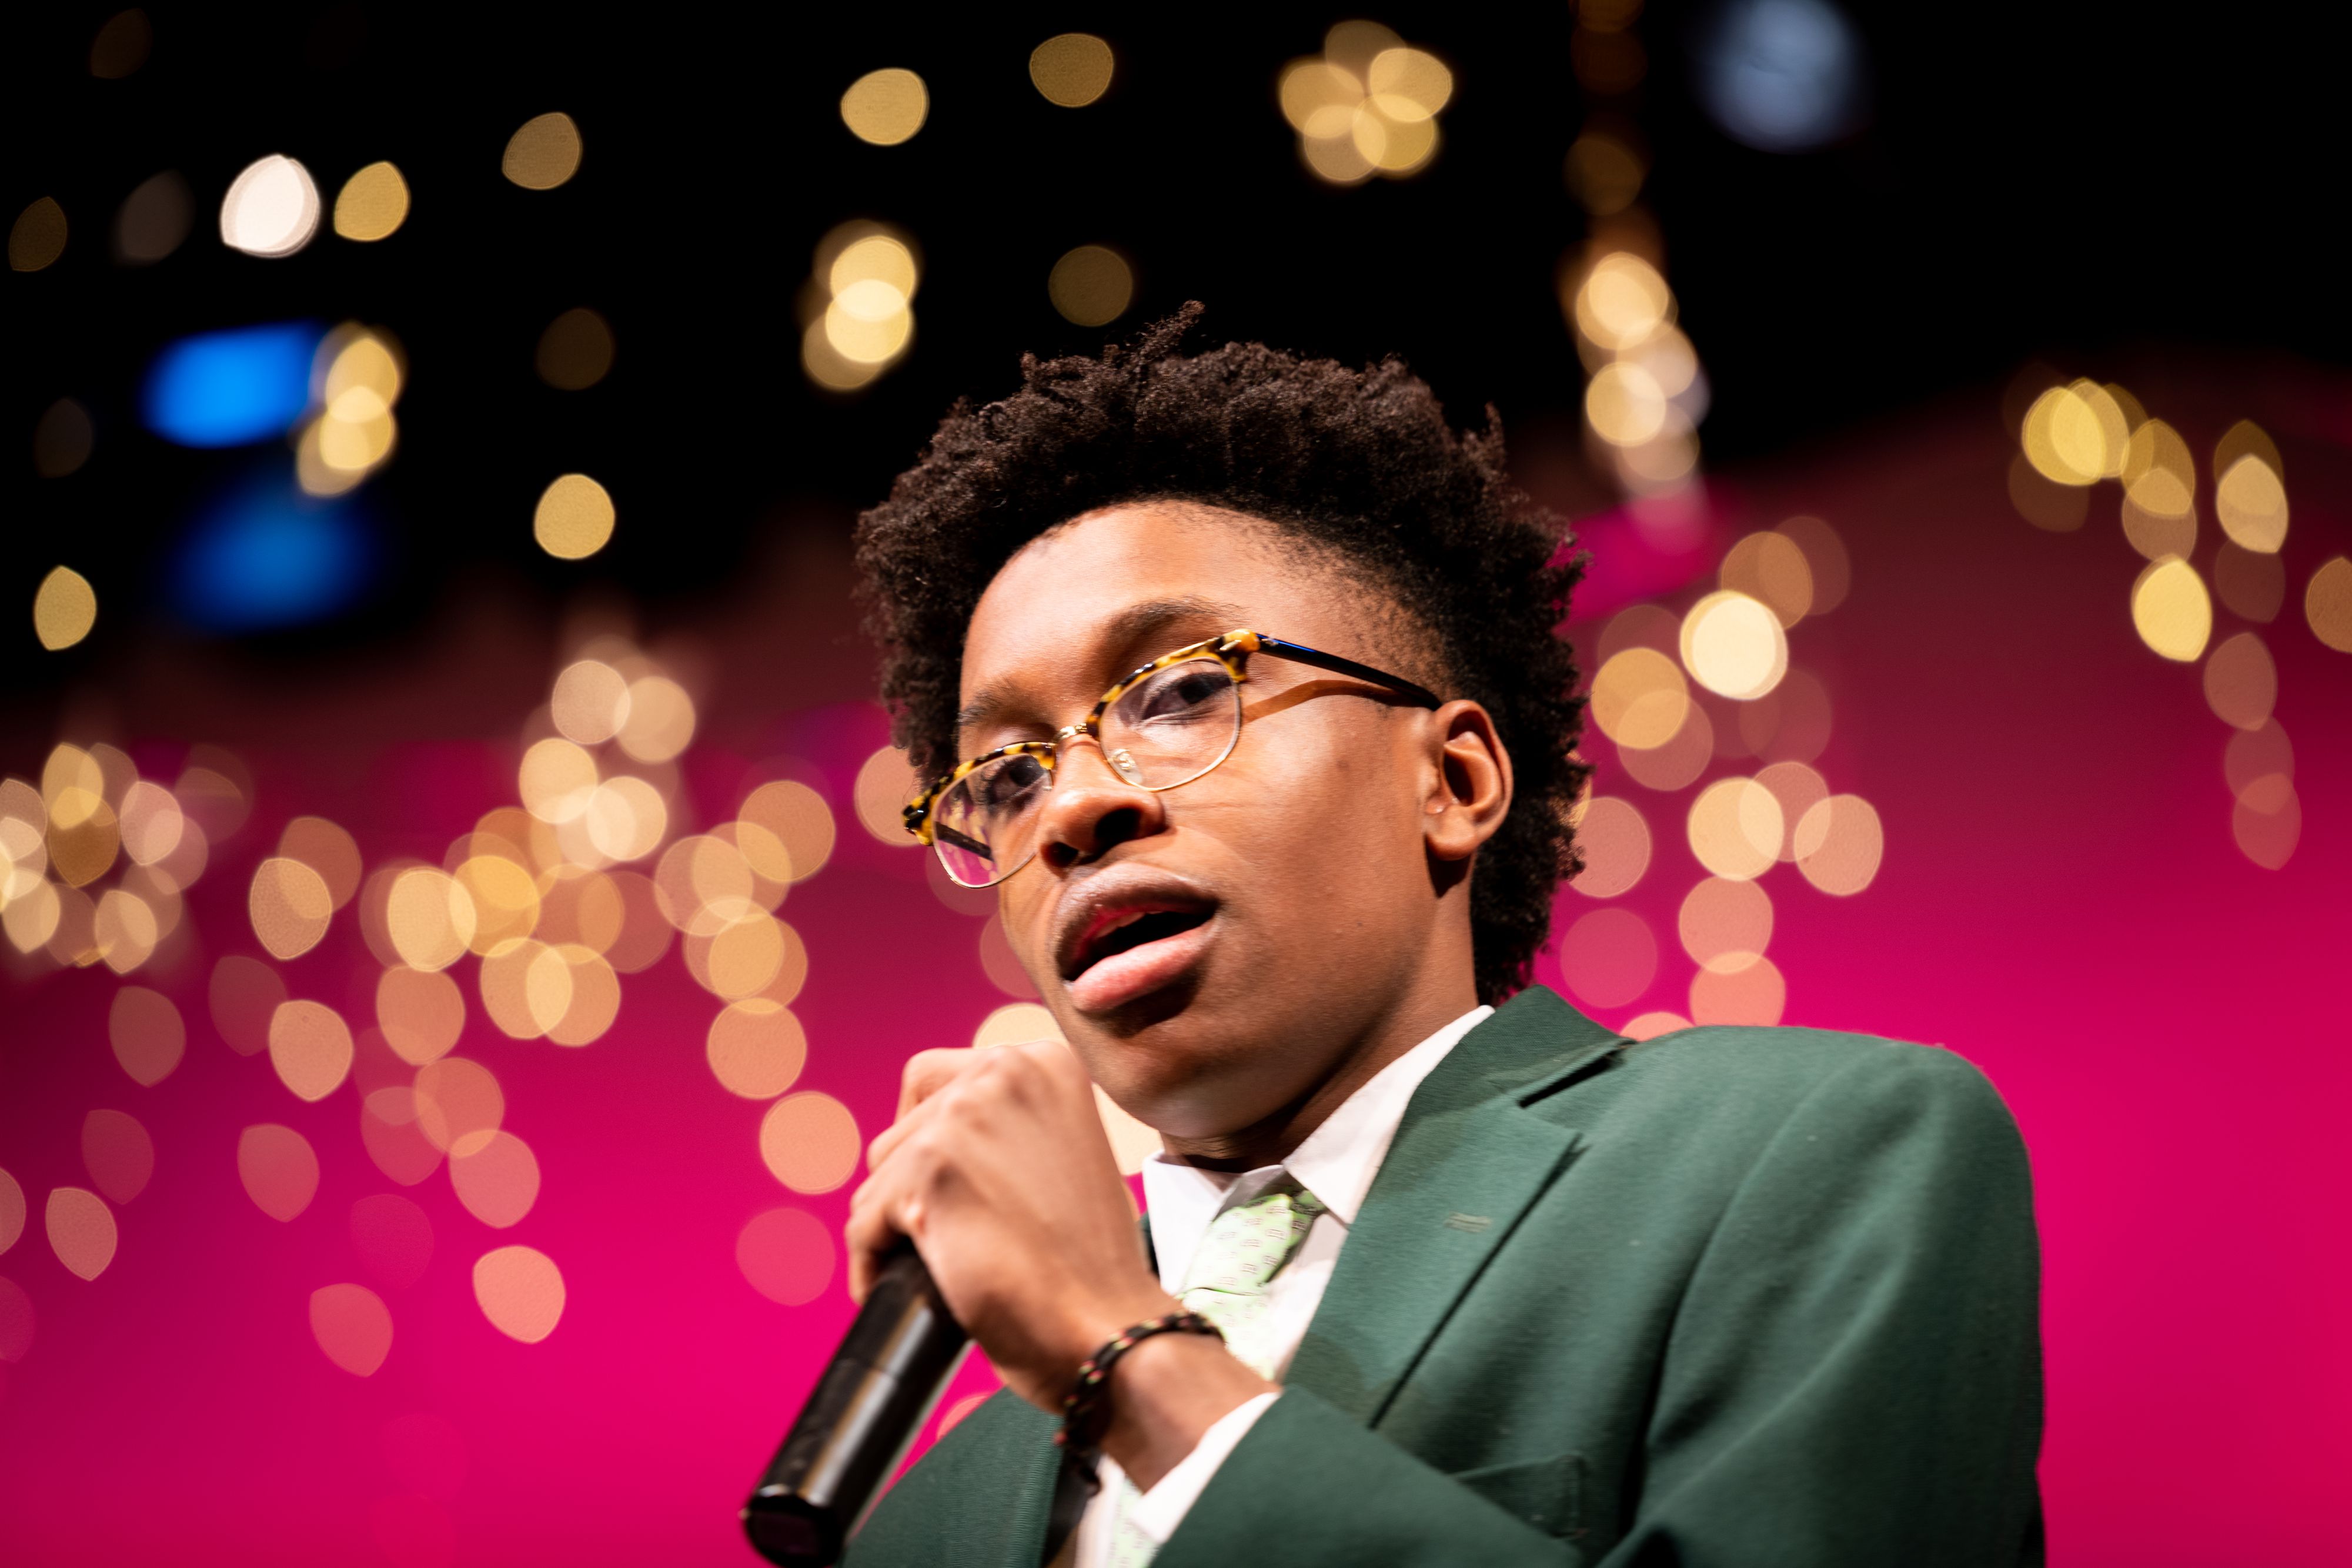 Young male African American in green jacket and tie singing with microphone looks at camera